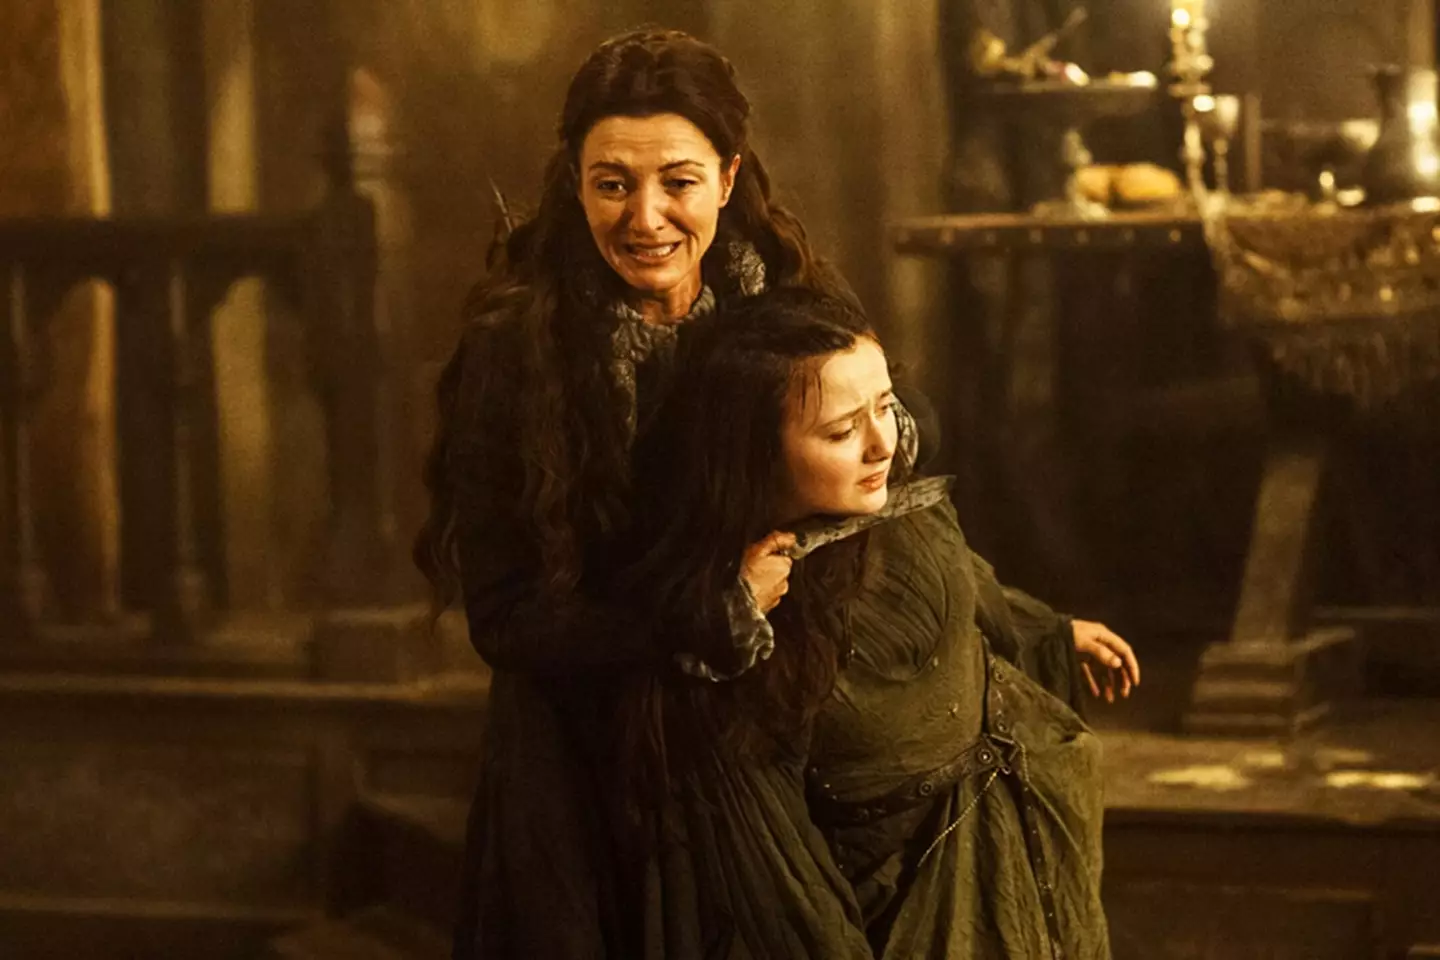 The Red Wedding in Game of Thrones is famous for its brutality.